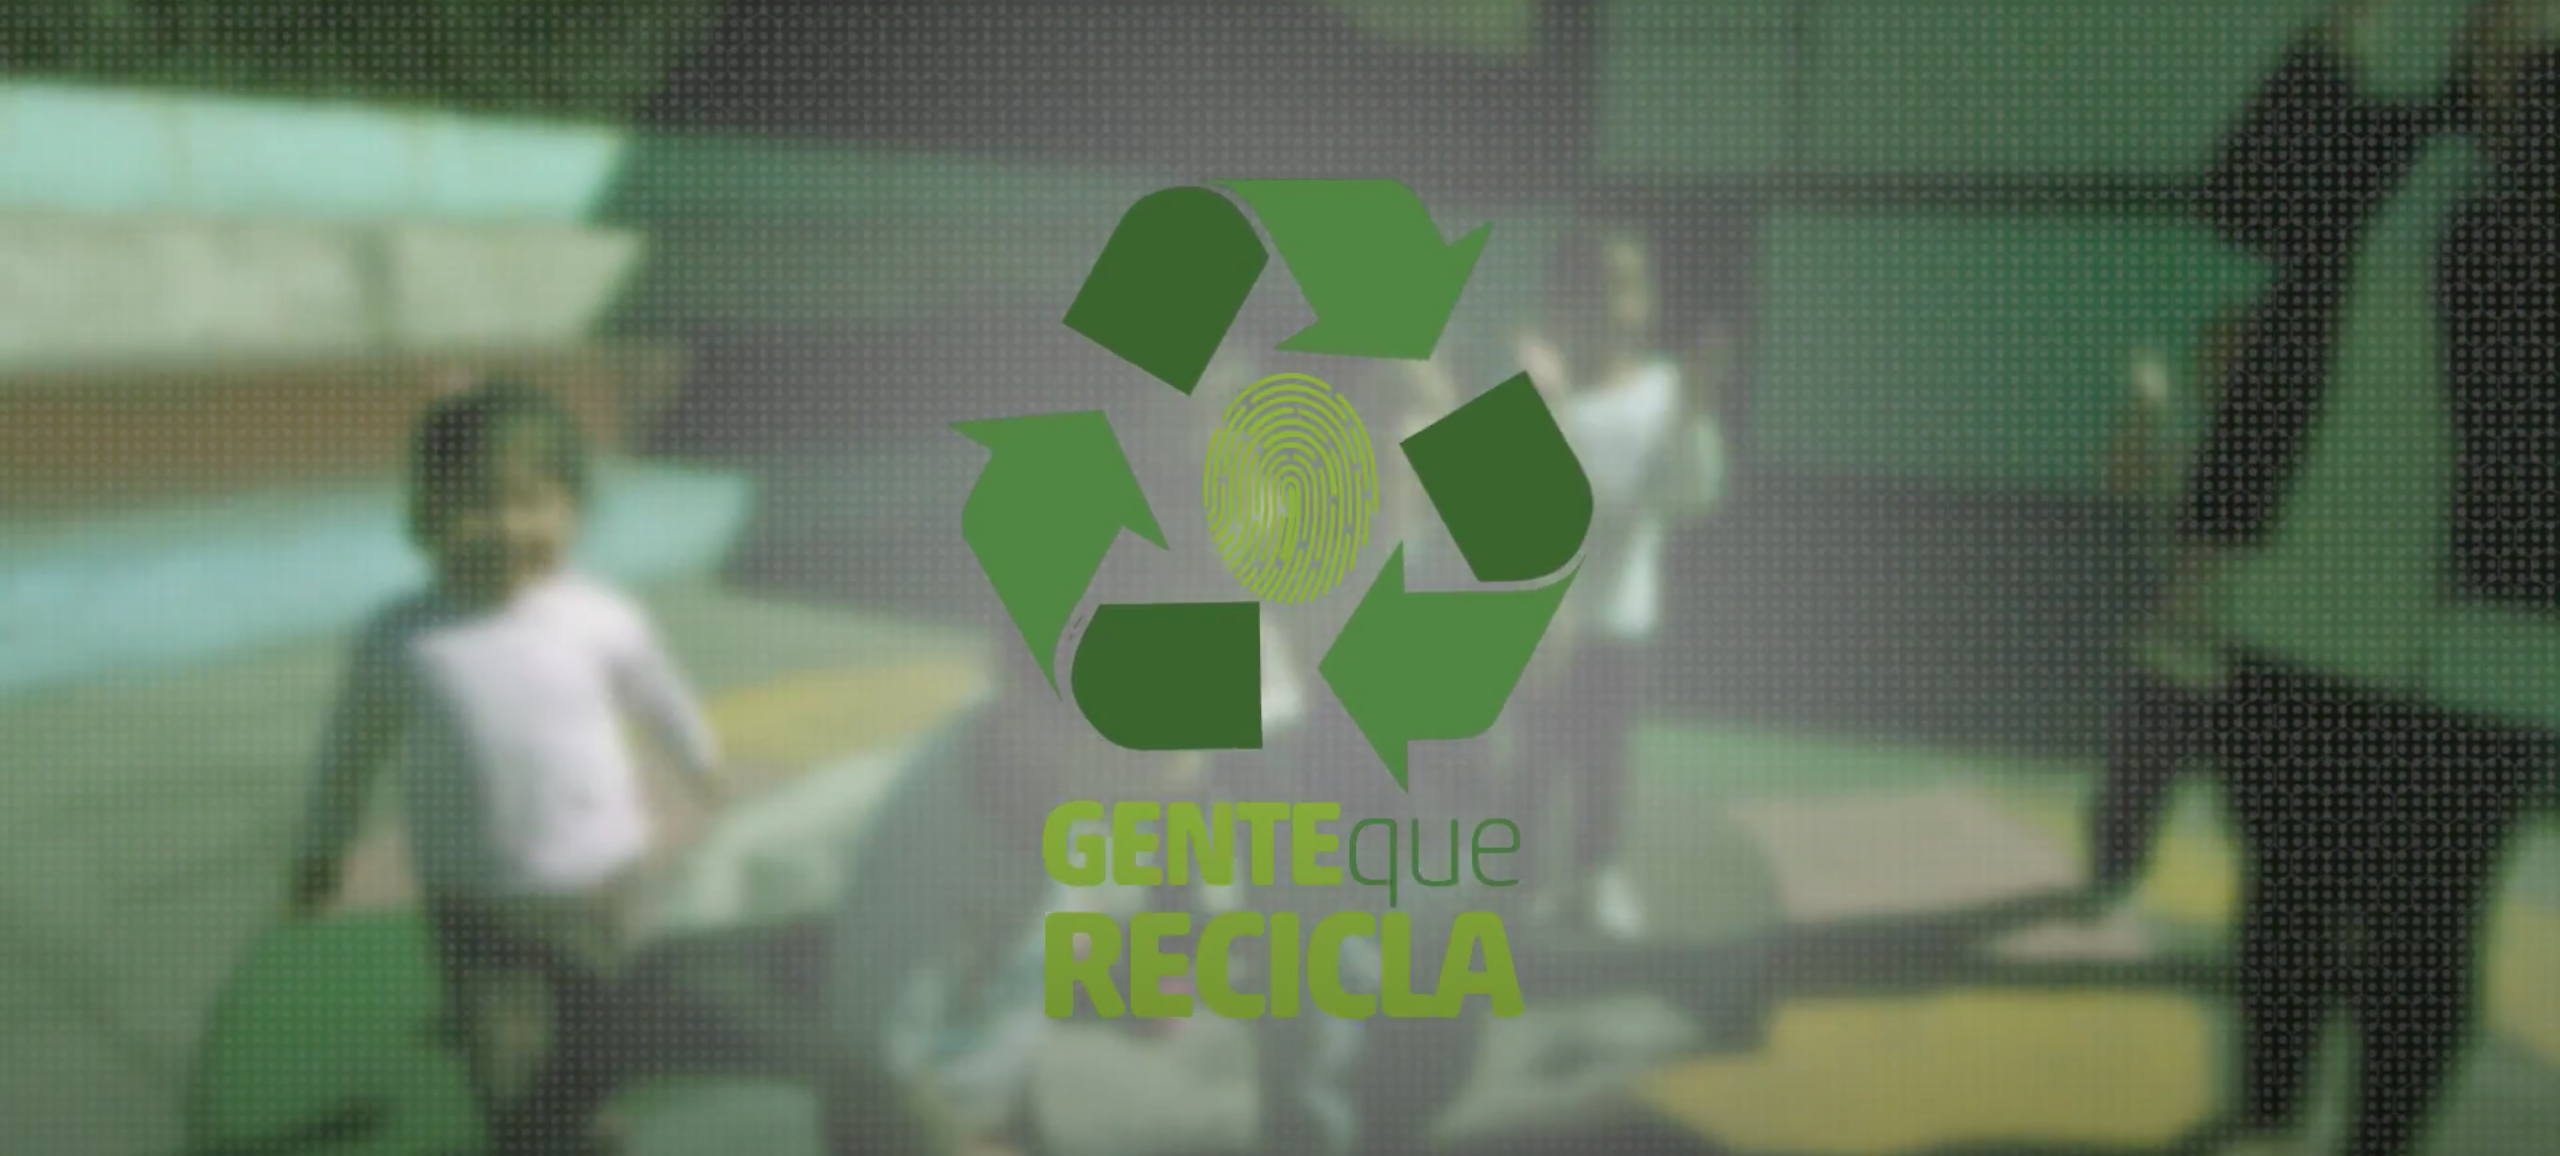 Tetra Pak Brazil approaches recycling in new series.